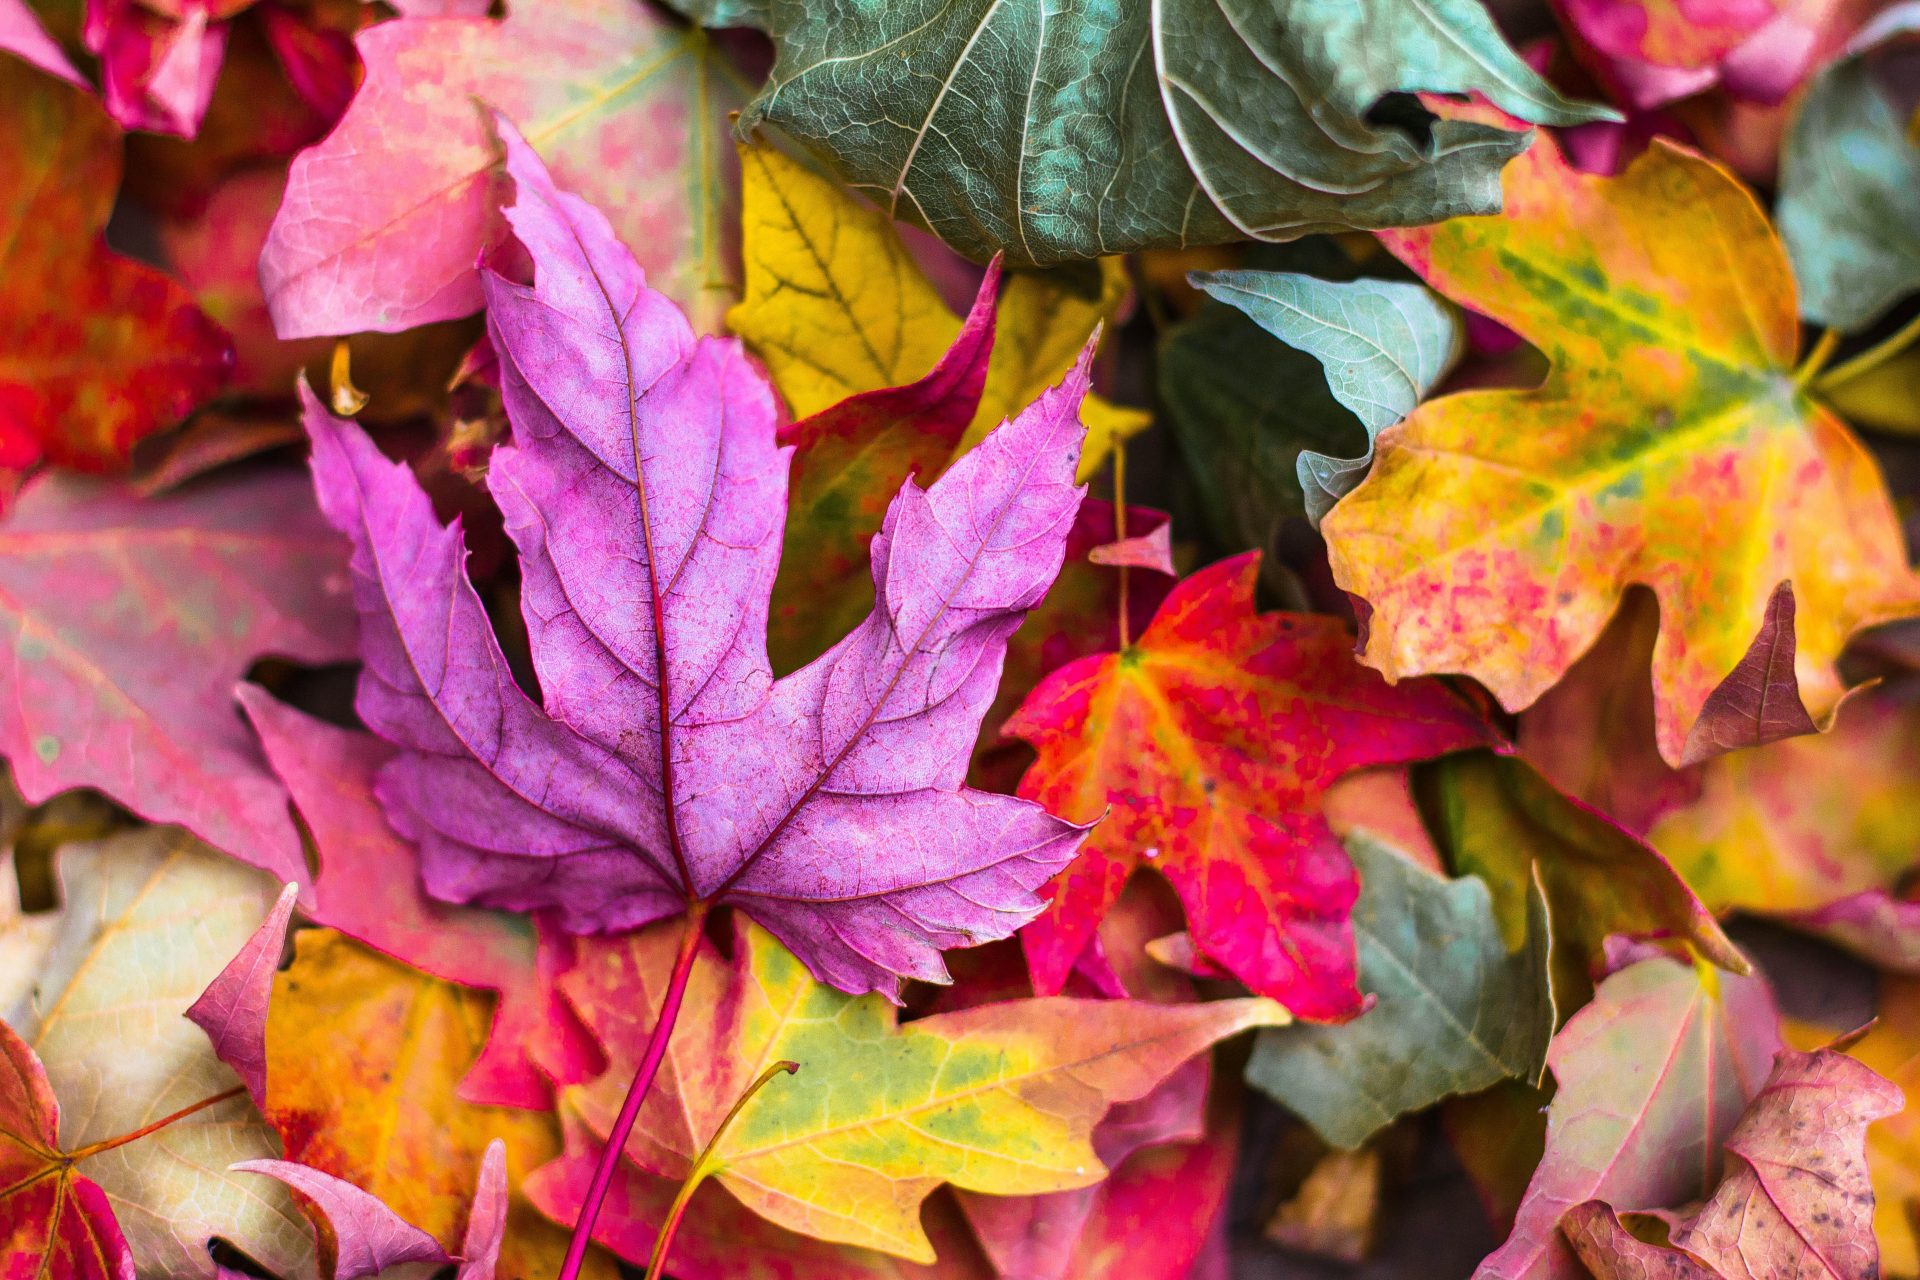 By leaving the leaves this fall, you will see a difference in your garden and soil next spring.